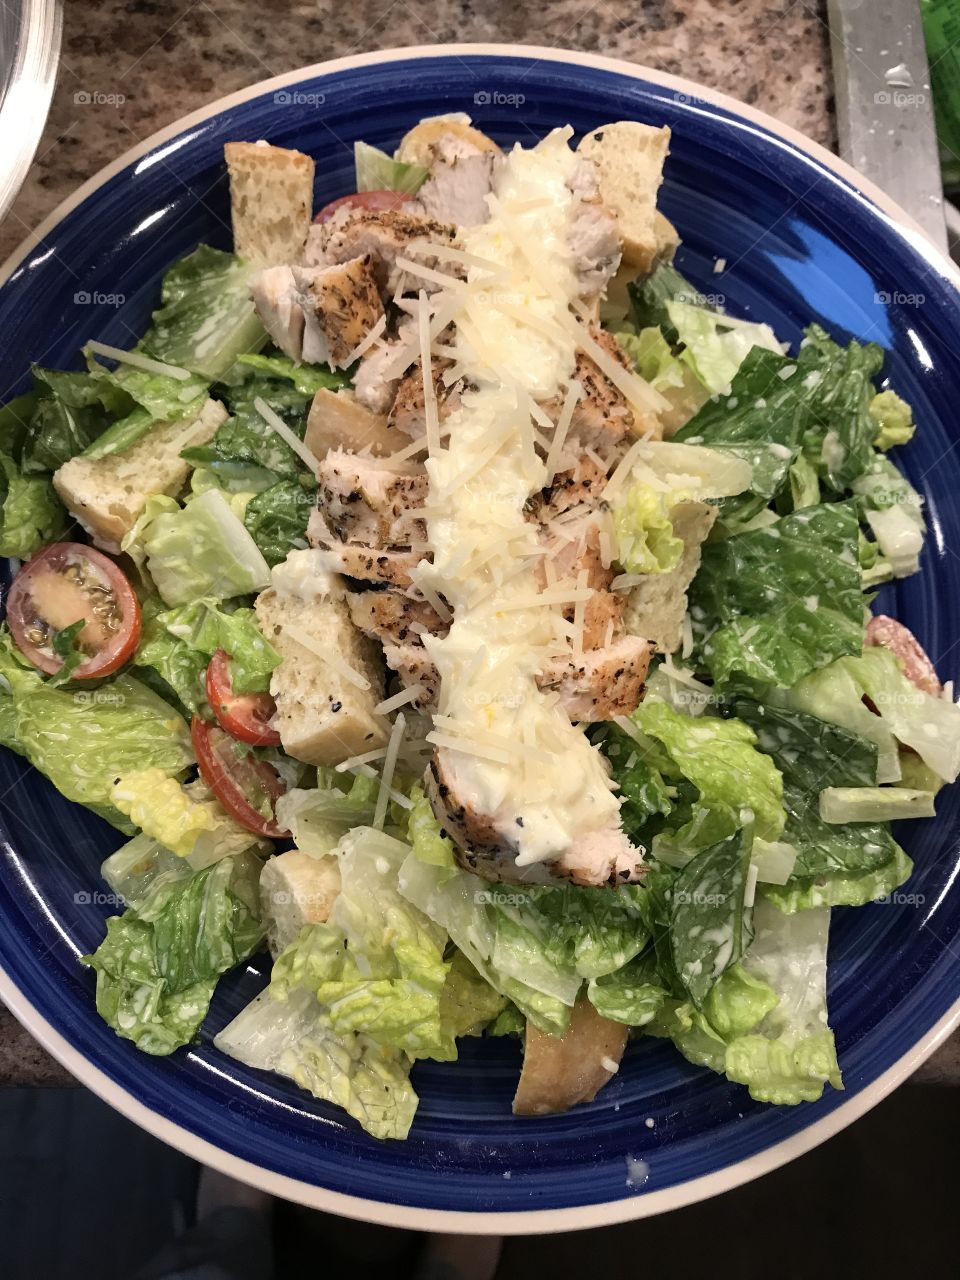 A Caesar salad to rule them all